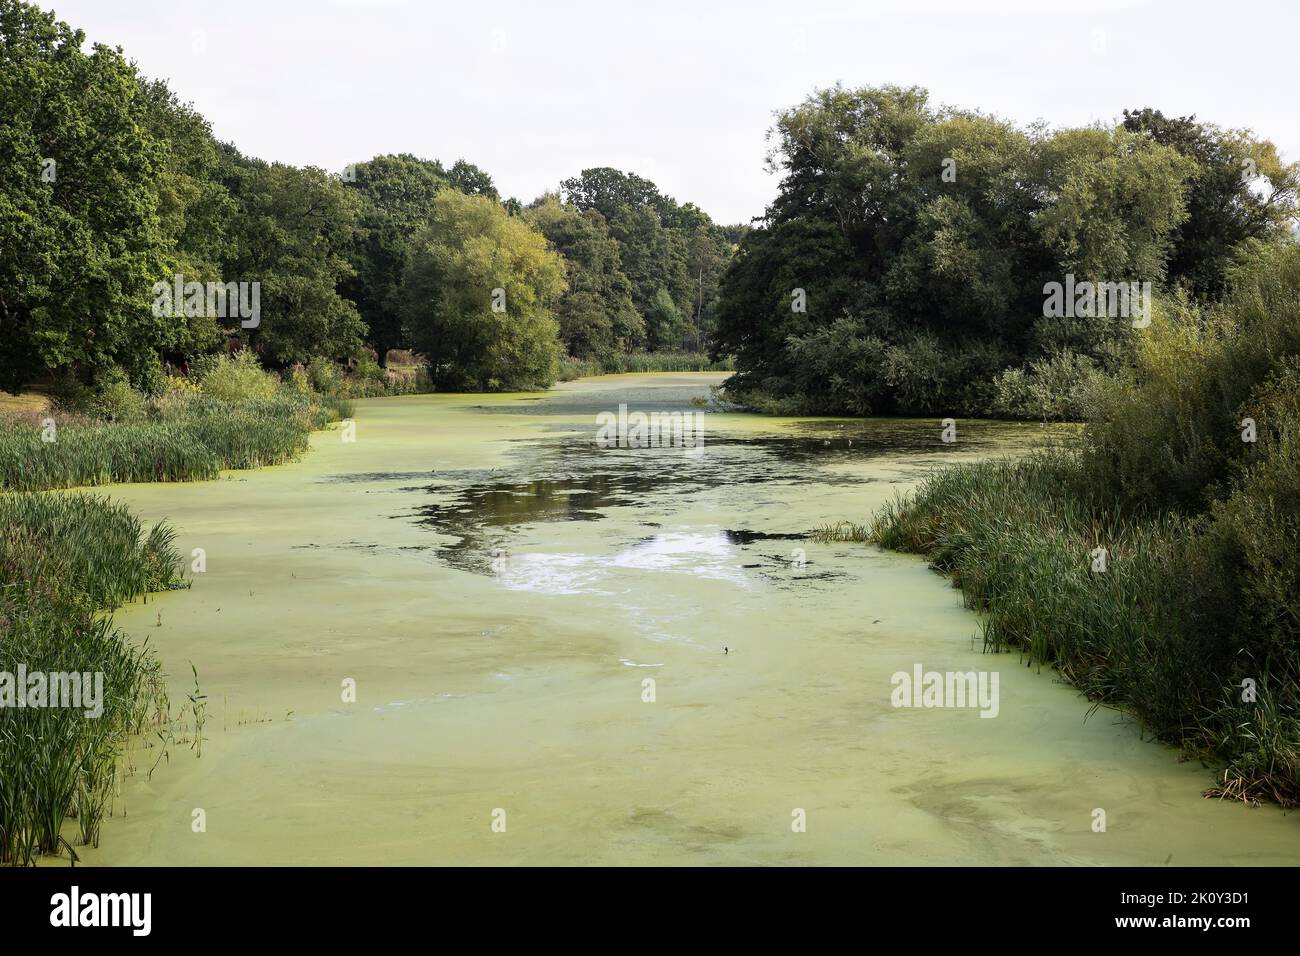 A view of the algae bloom covering the Lower Lake following a long hot summer at the Yorkshire Sculpture Park near Wakefield, U.K. Stock Photo